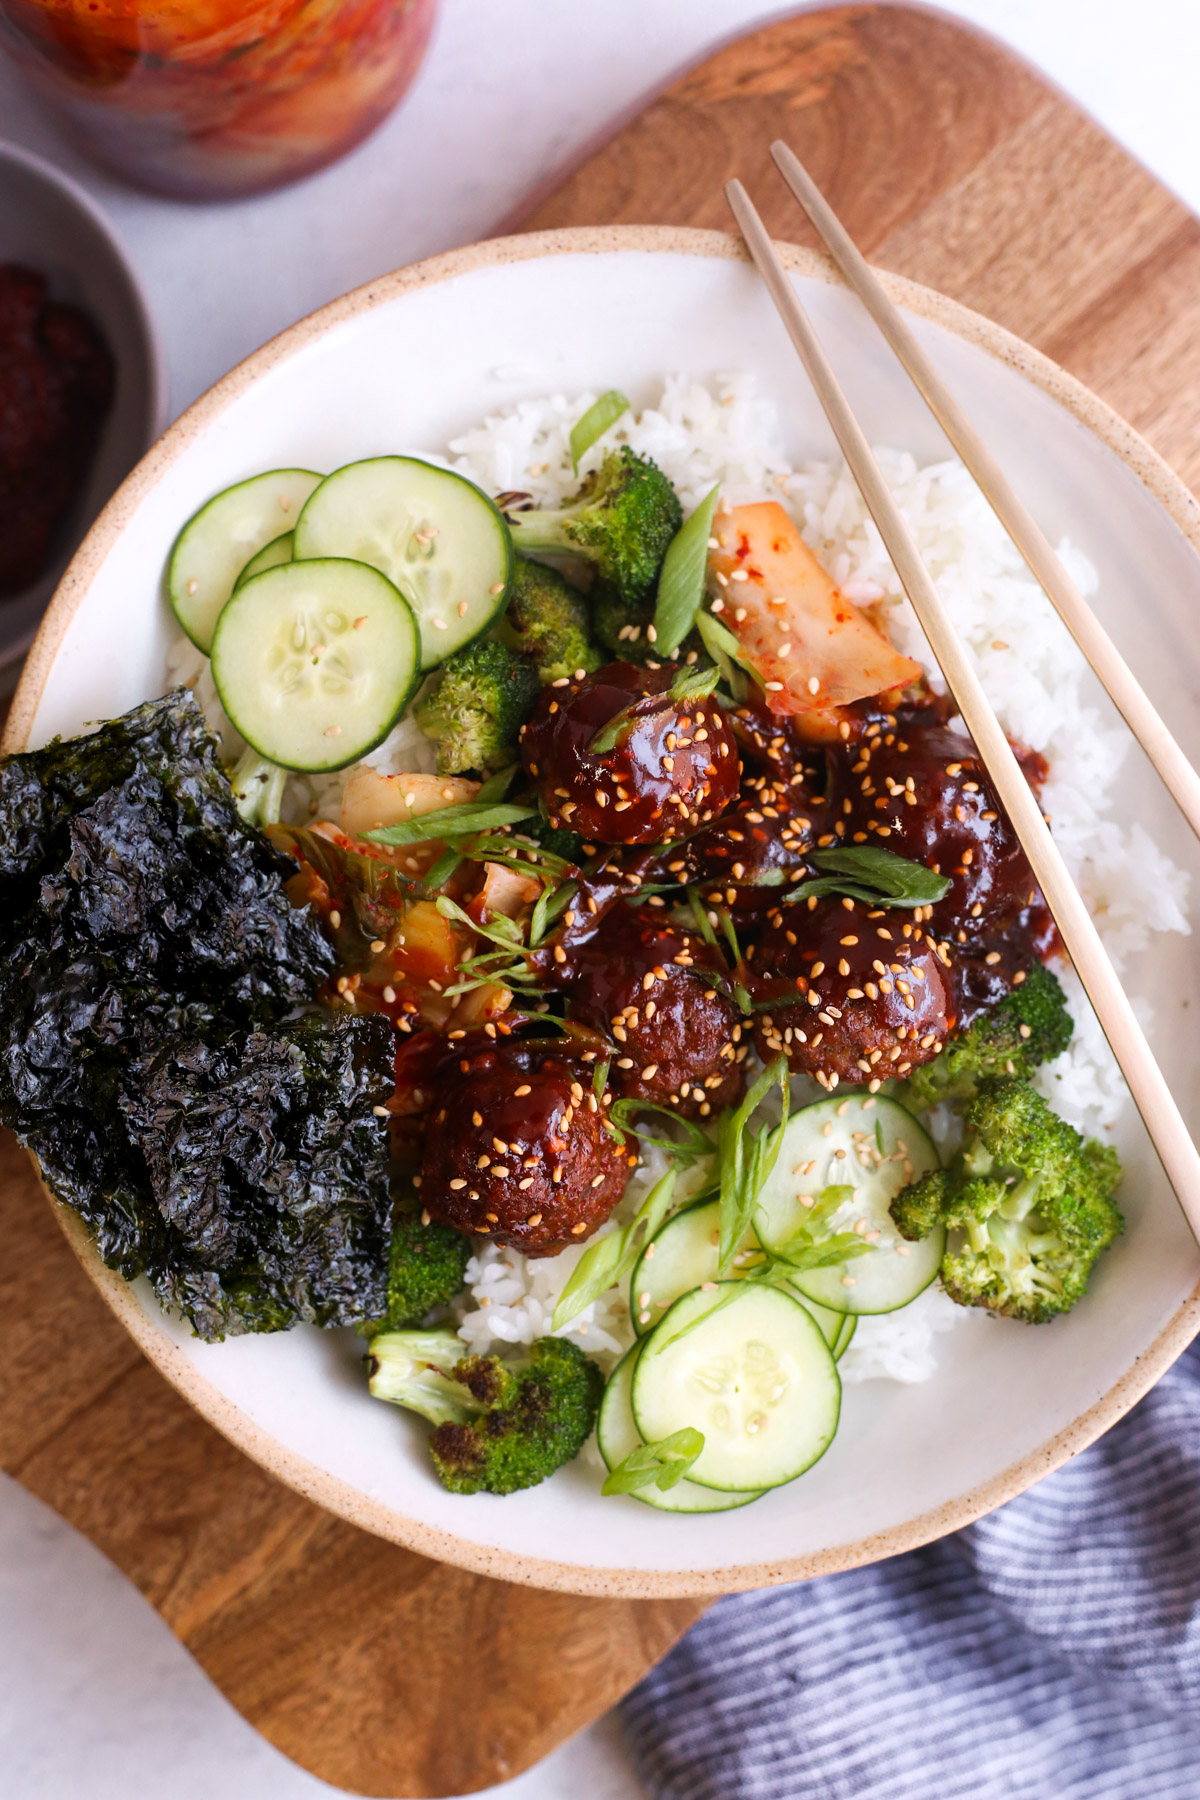 A rice bowl containing white rice, gochujang meatballs, sliced cucumbers, roasted broccoli, kimchi, and nori, garnished with toasted sesame seeds